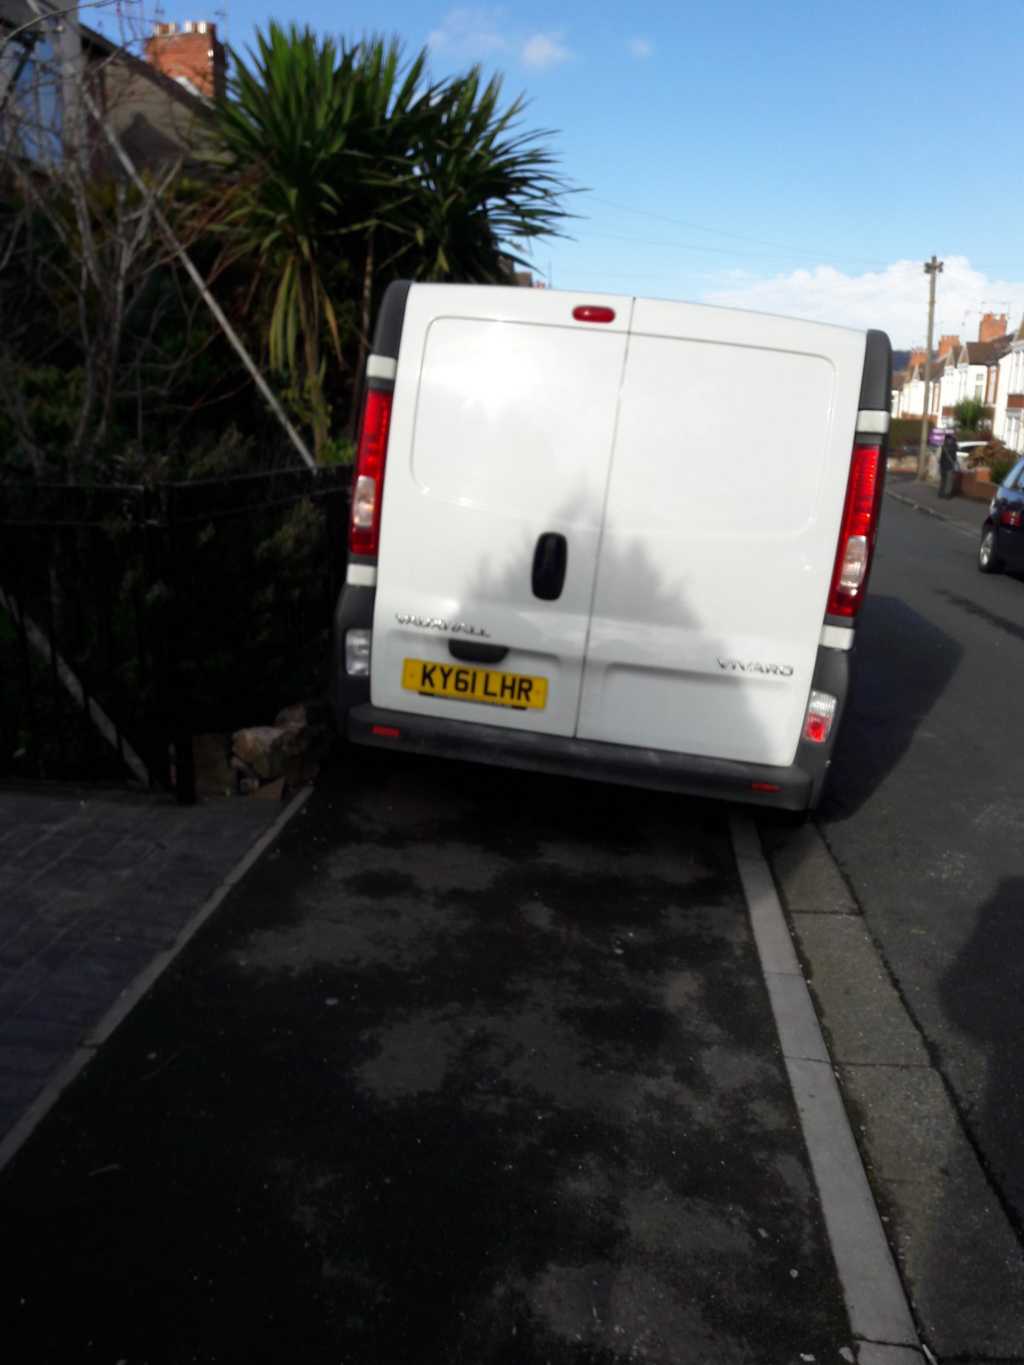 KY61 LHR  displaying Inconsiderate Parking